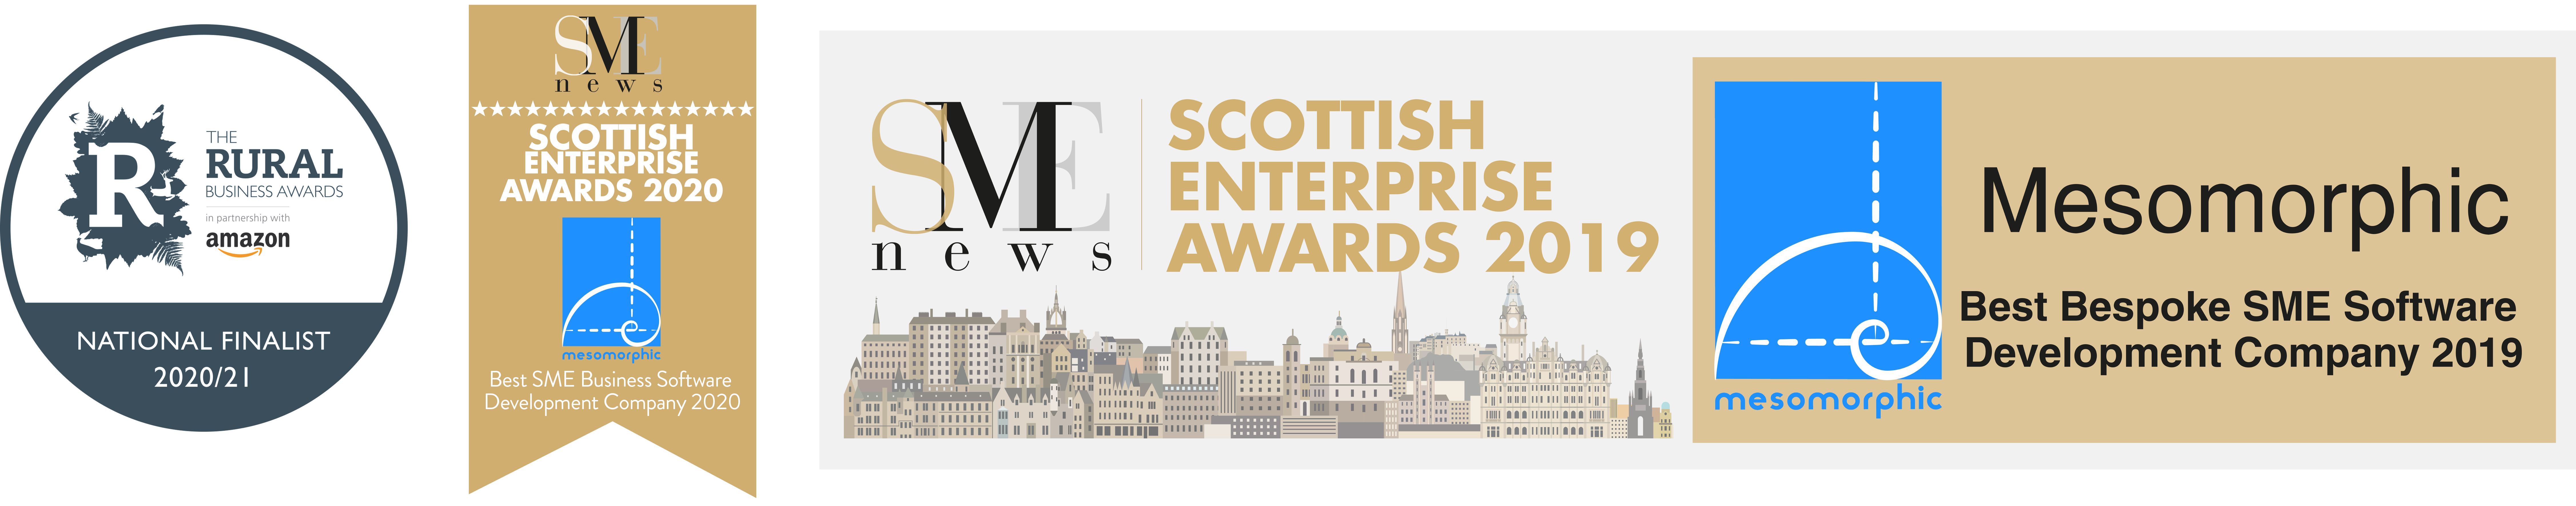 Combined awards logos for Amazon Rural Business Award finalists, SME Business Awards 2019 and 2020